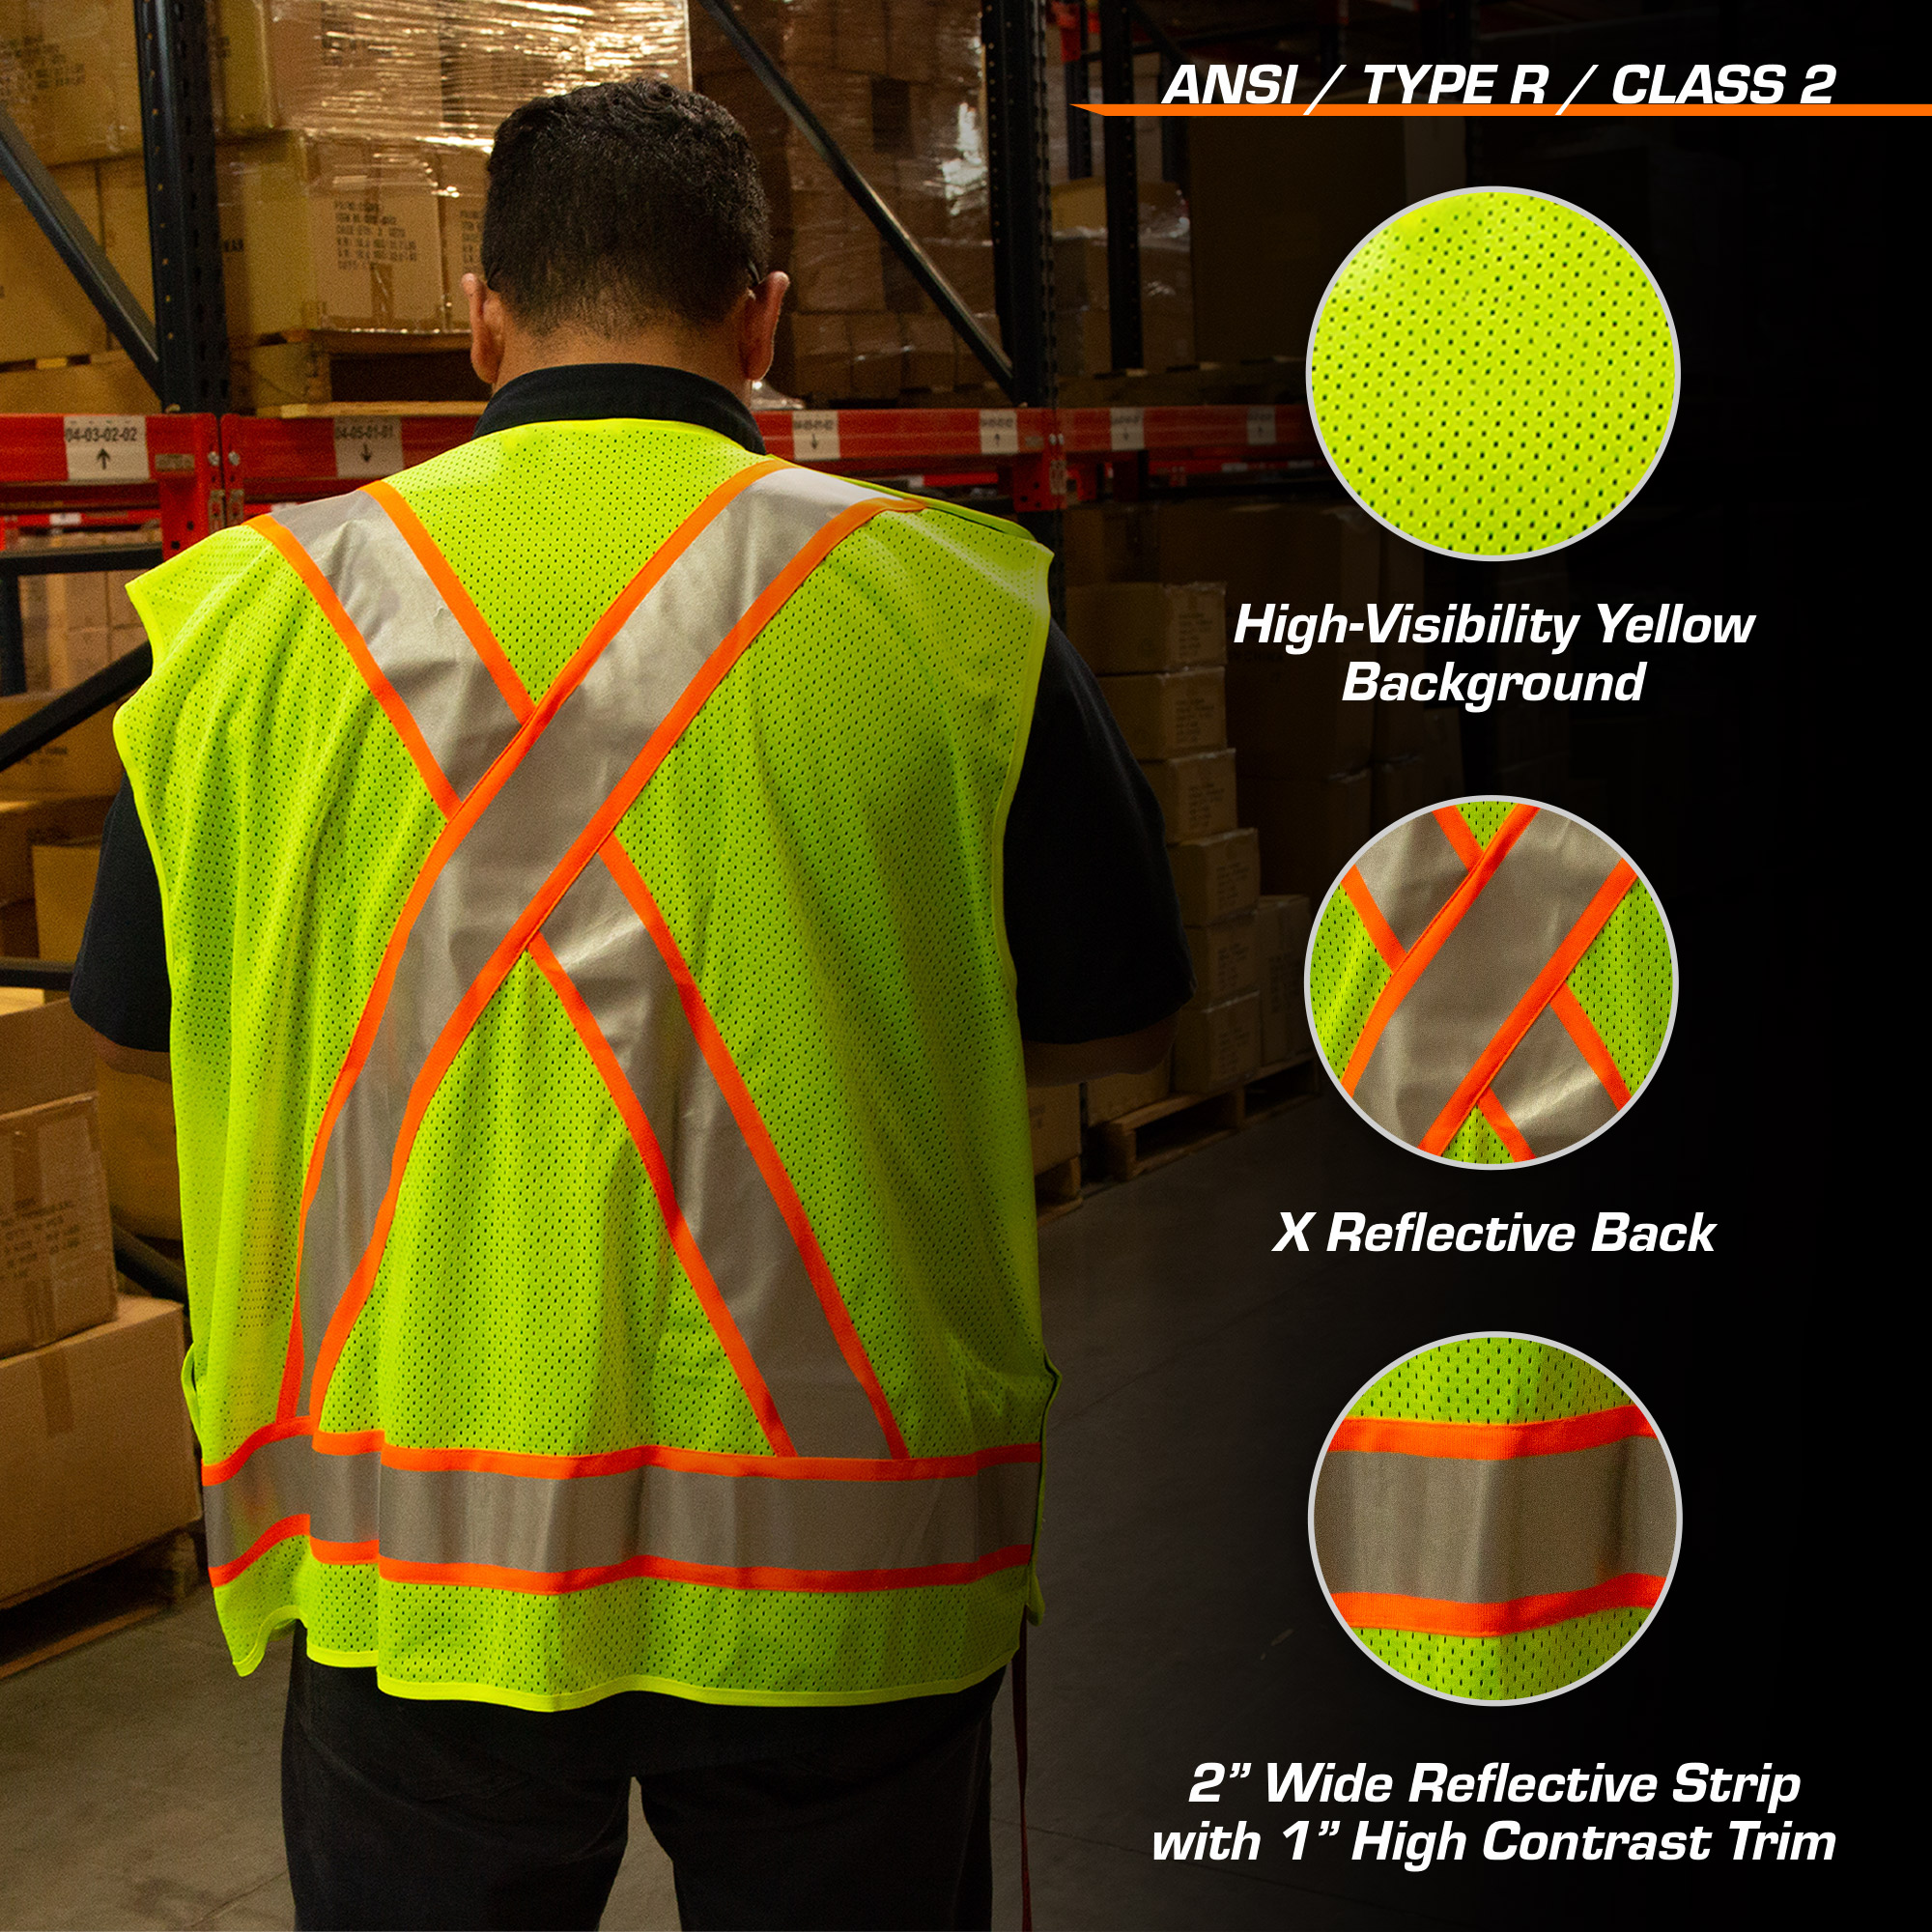 TR Industrial 5-Point Breakaway High Visibility Safety Vest, Type R Class 2, Size XL, 5-Pack